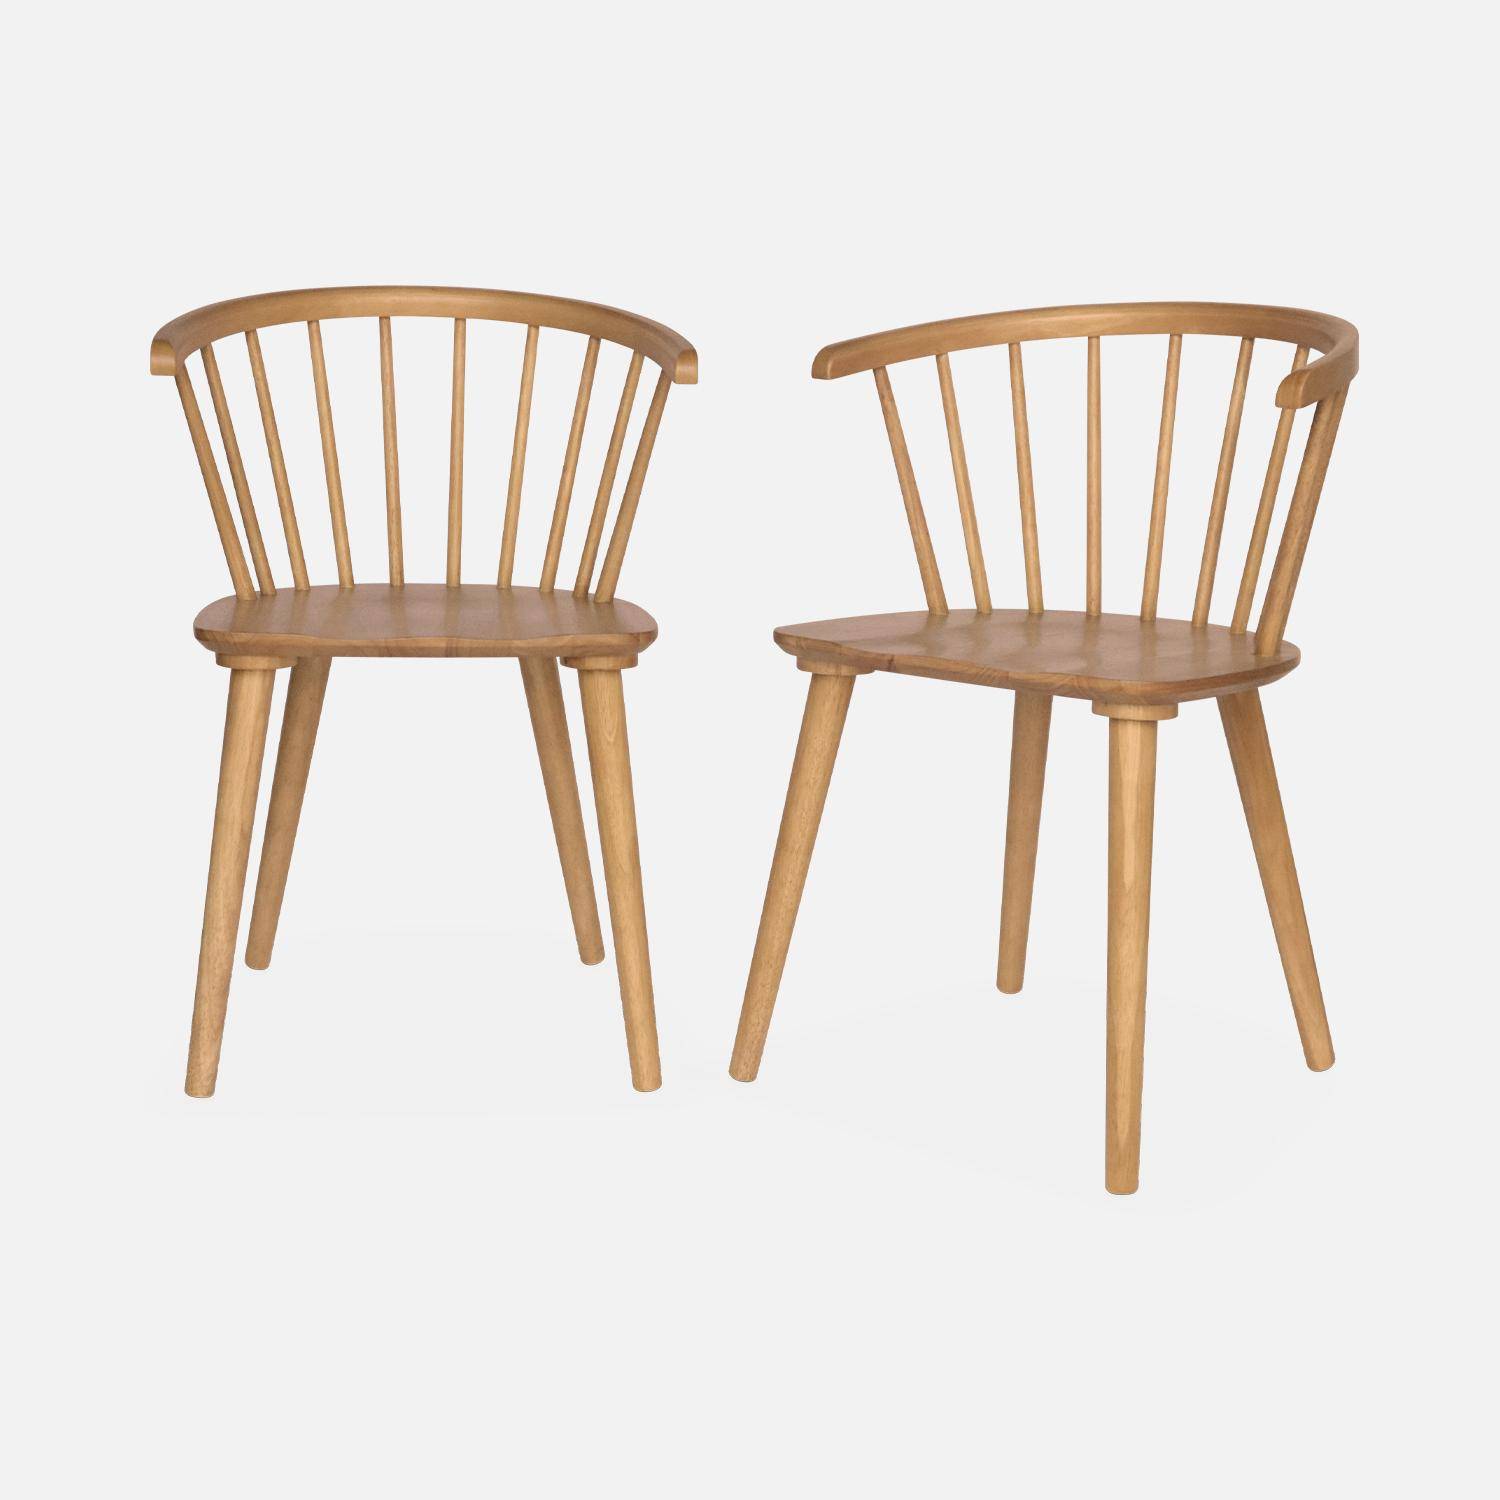 Pair of  Wood and Plywood Spindle Chairs, natural, L53 x W47.5 x H76cm ,sweeek,Photo3